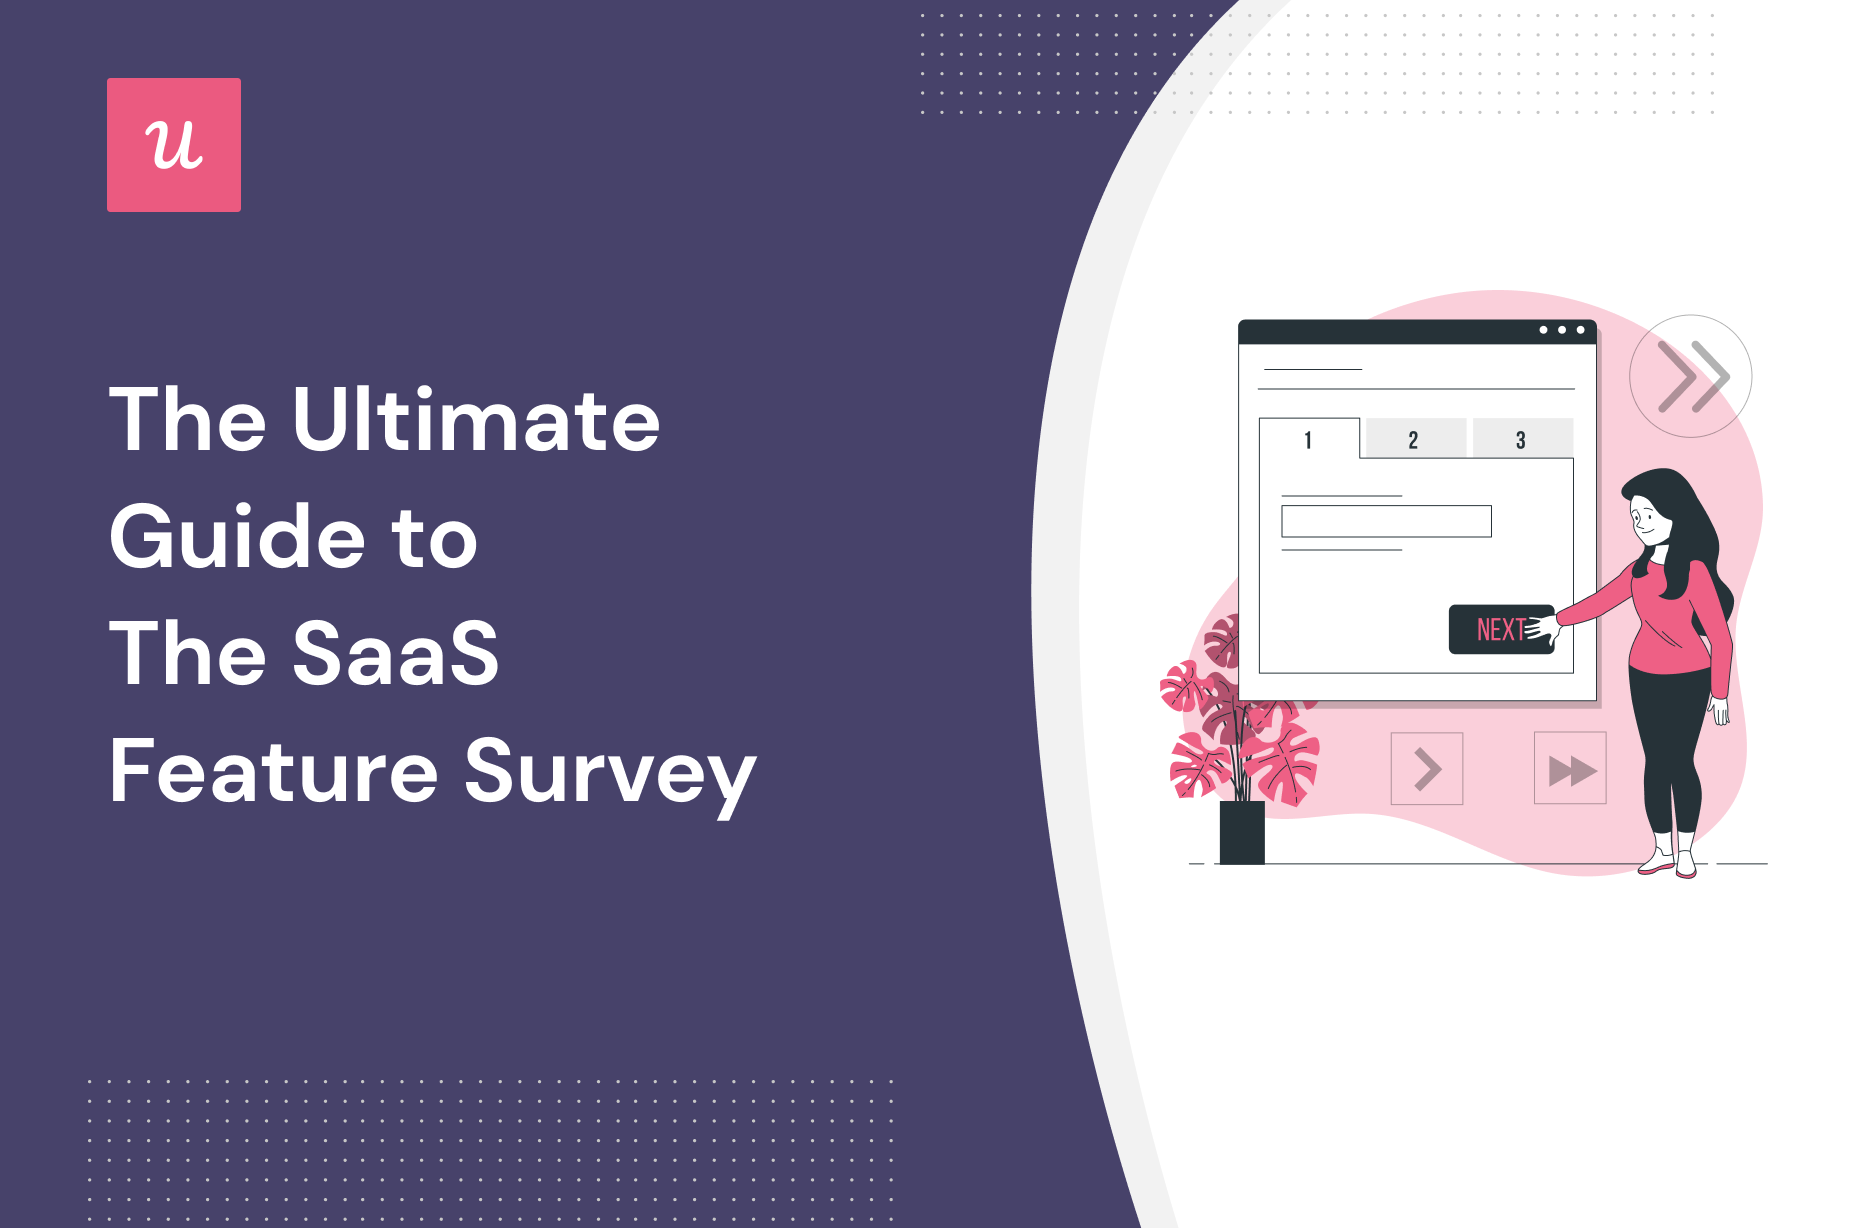 The Ultimate Guide To The SaaS Feature Survey